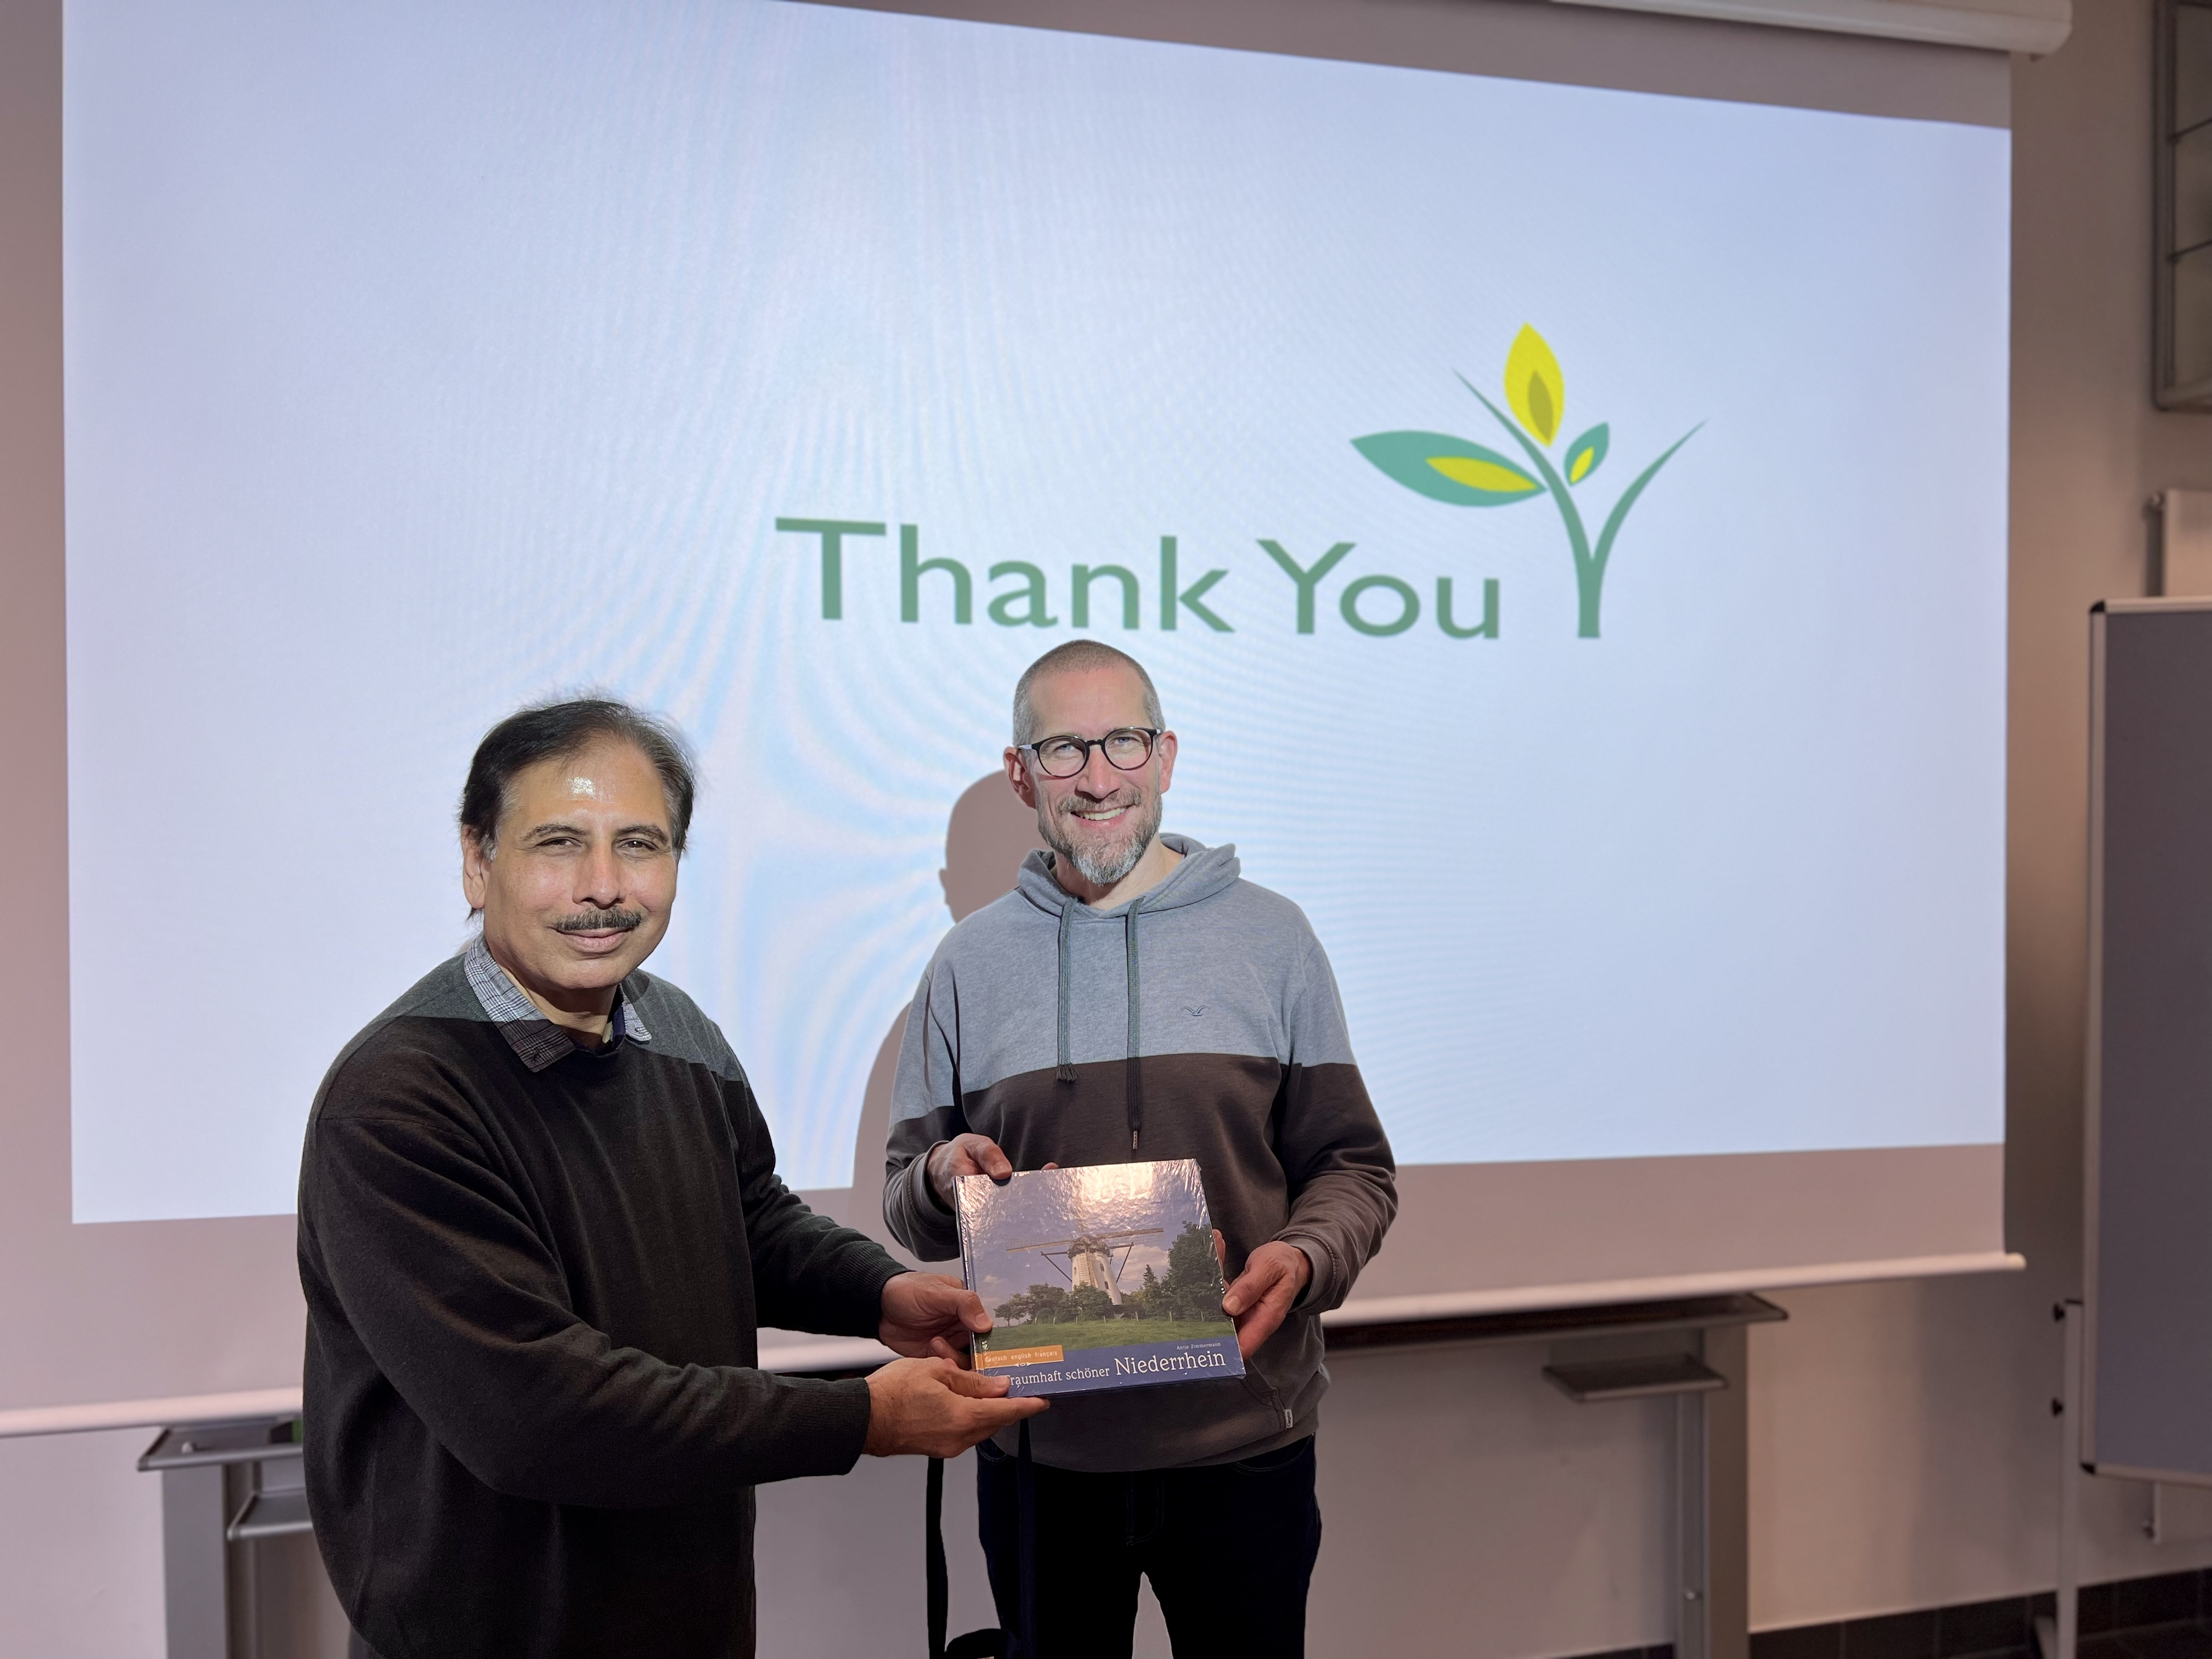 The image features two men standing in front of a presentation screen that displays a "Thank You" message with a graphic of a green sprout with three leaves on the right side of the screen. The man on the left, Professor Khan, is holding a book and is dressed in a dark sweater over a collared shirt, smiling as he faces the camera. The man on the right, Professor Wichern, is also smiling at the camera, and he's dressed in a hoodie. The background is a plain wall and part of a flip chart stand can be seen to the right of the image. They are in a seminar room, and the mood is positive.